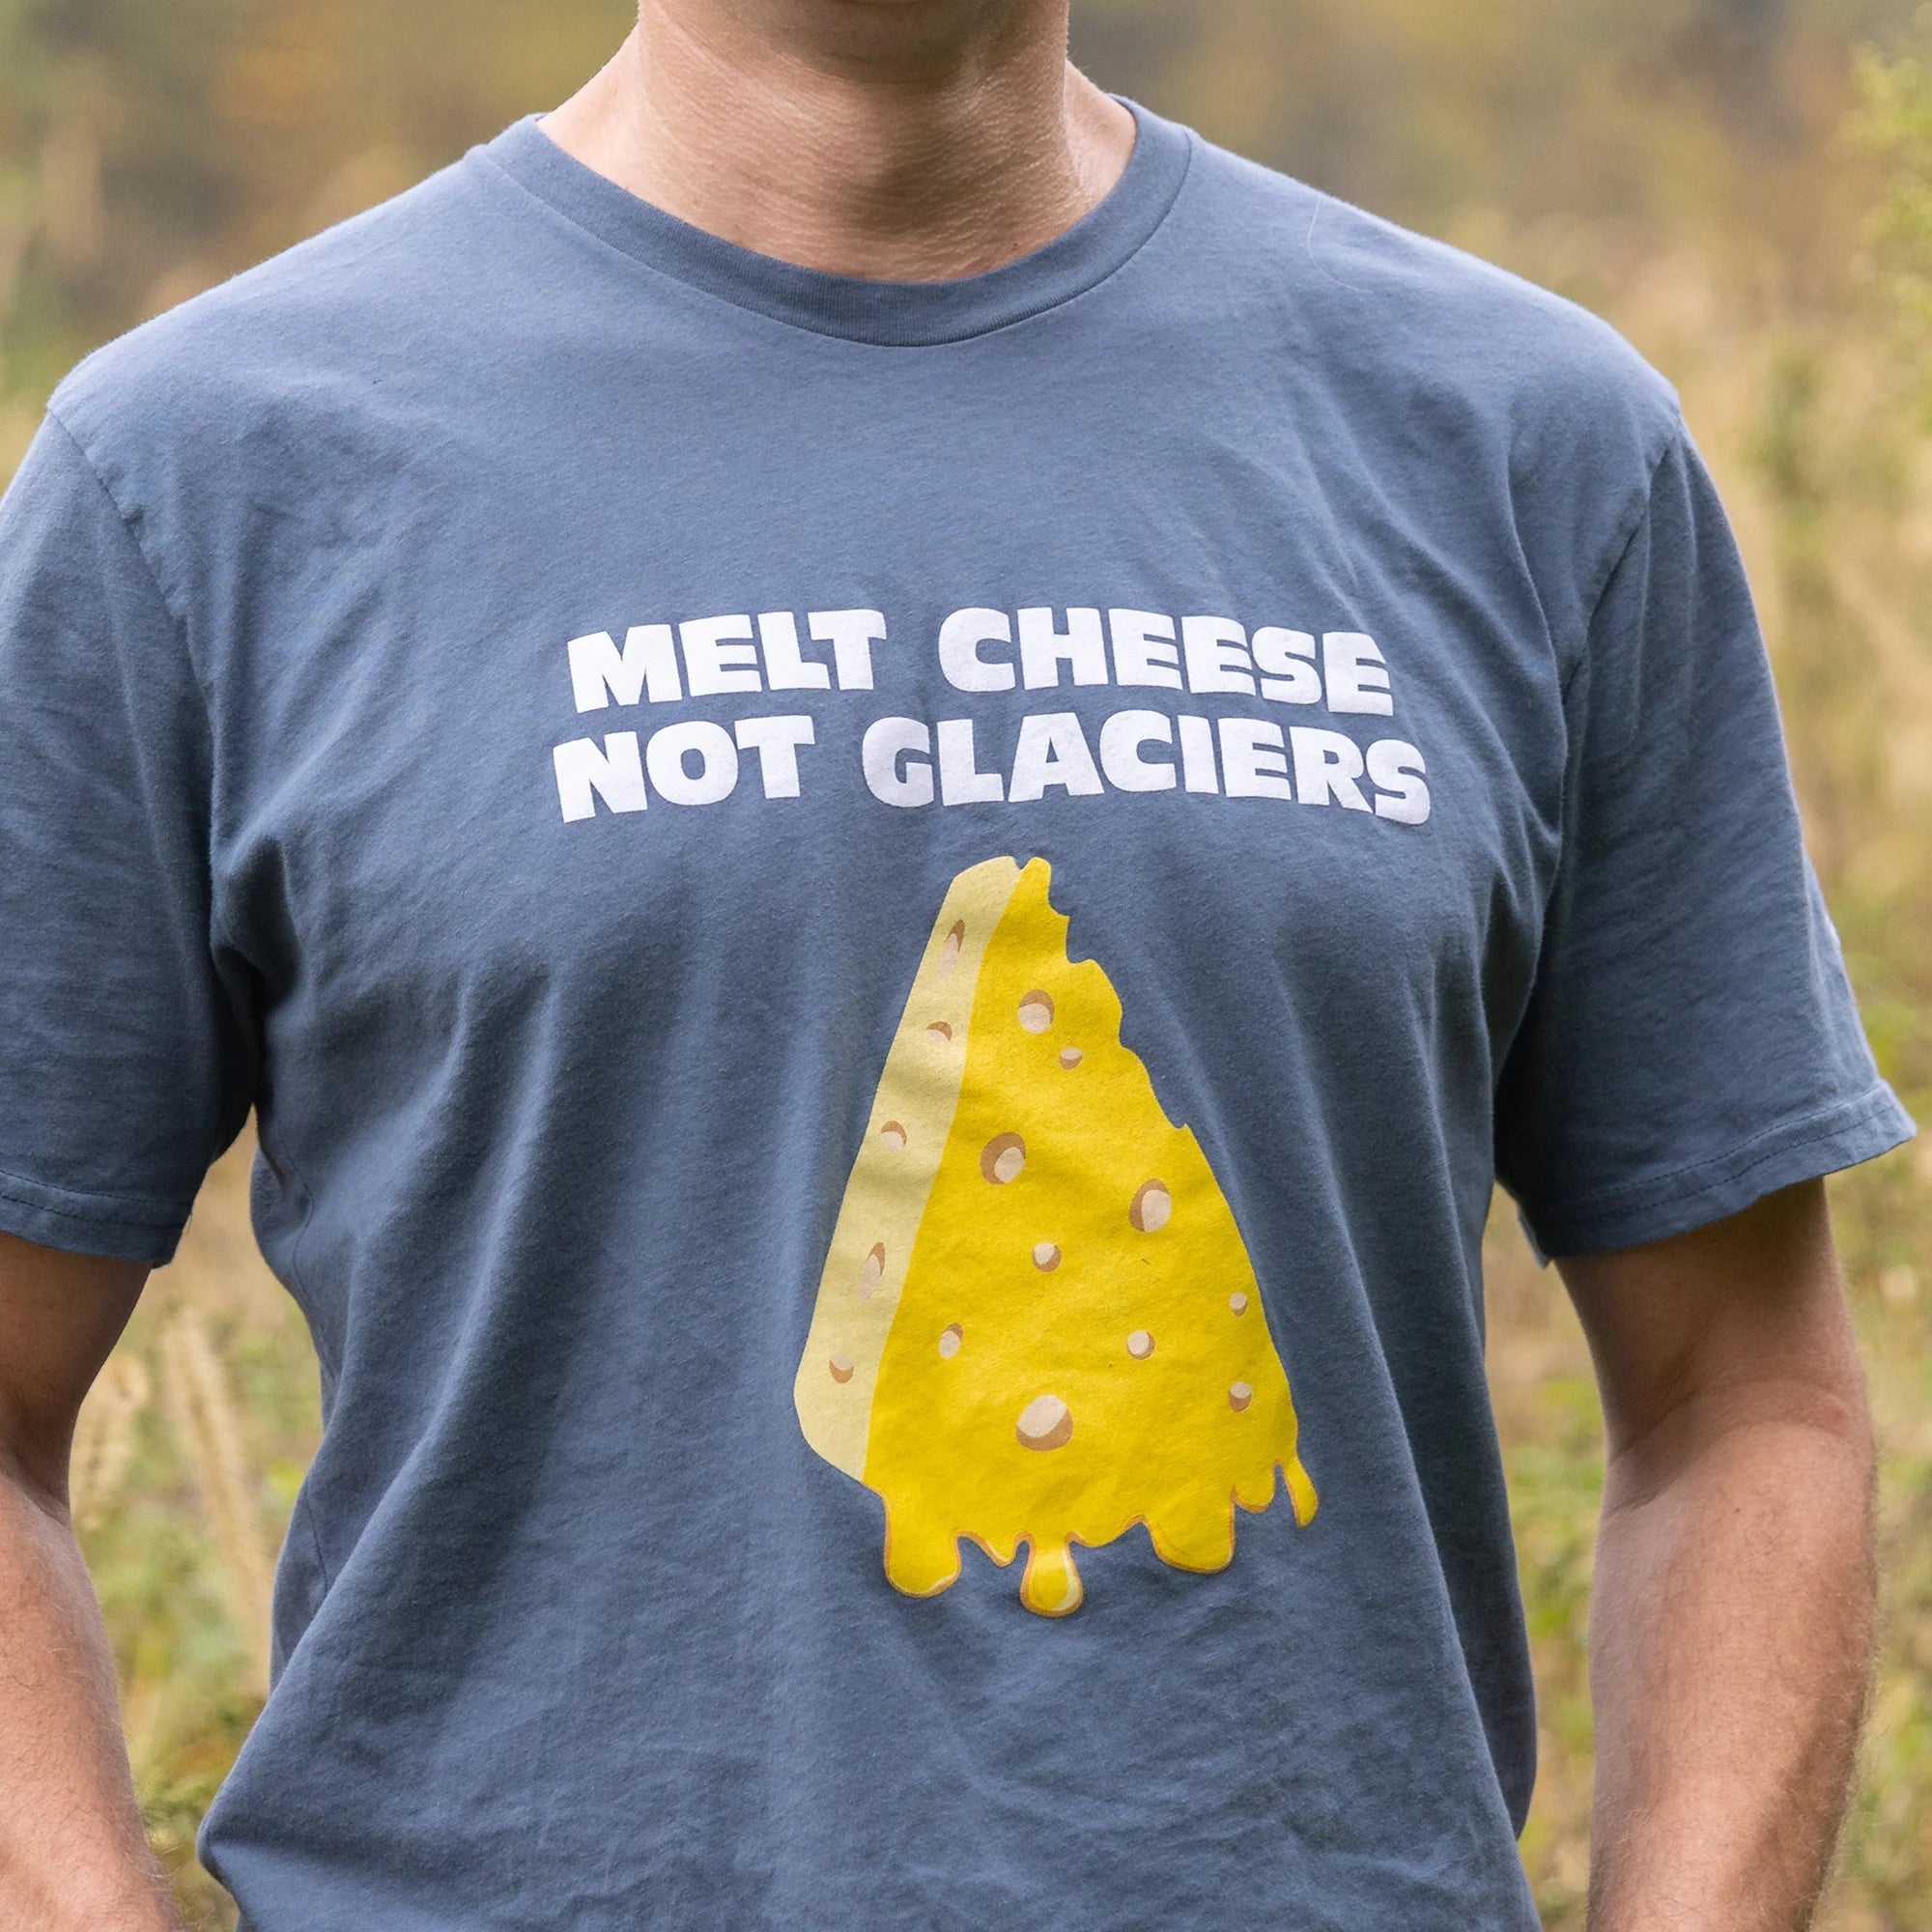 Melt Cheese Tee in Pacific Blue color